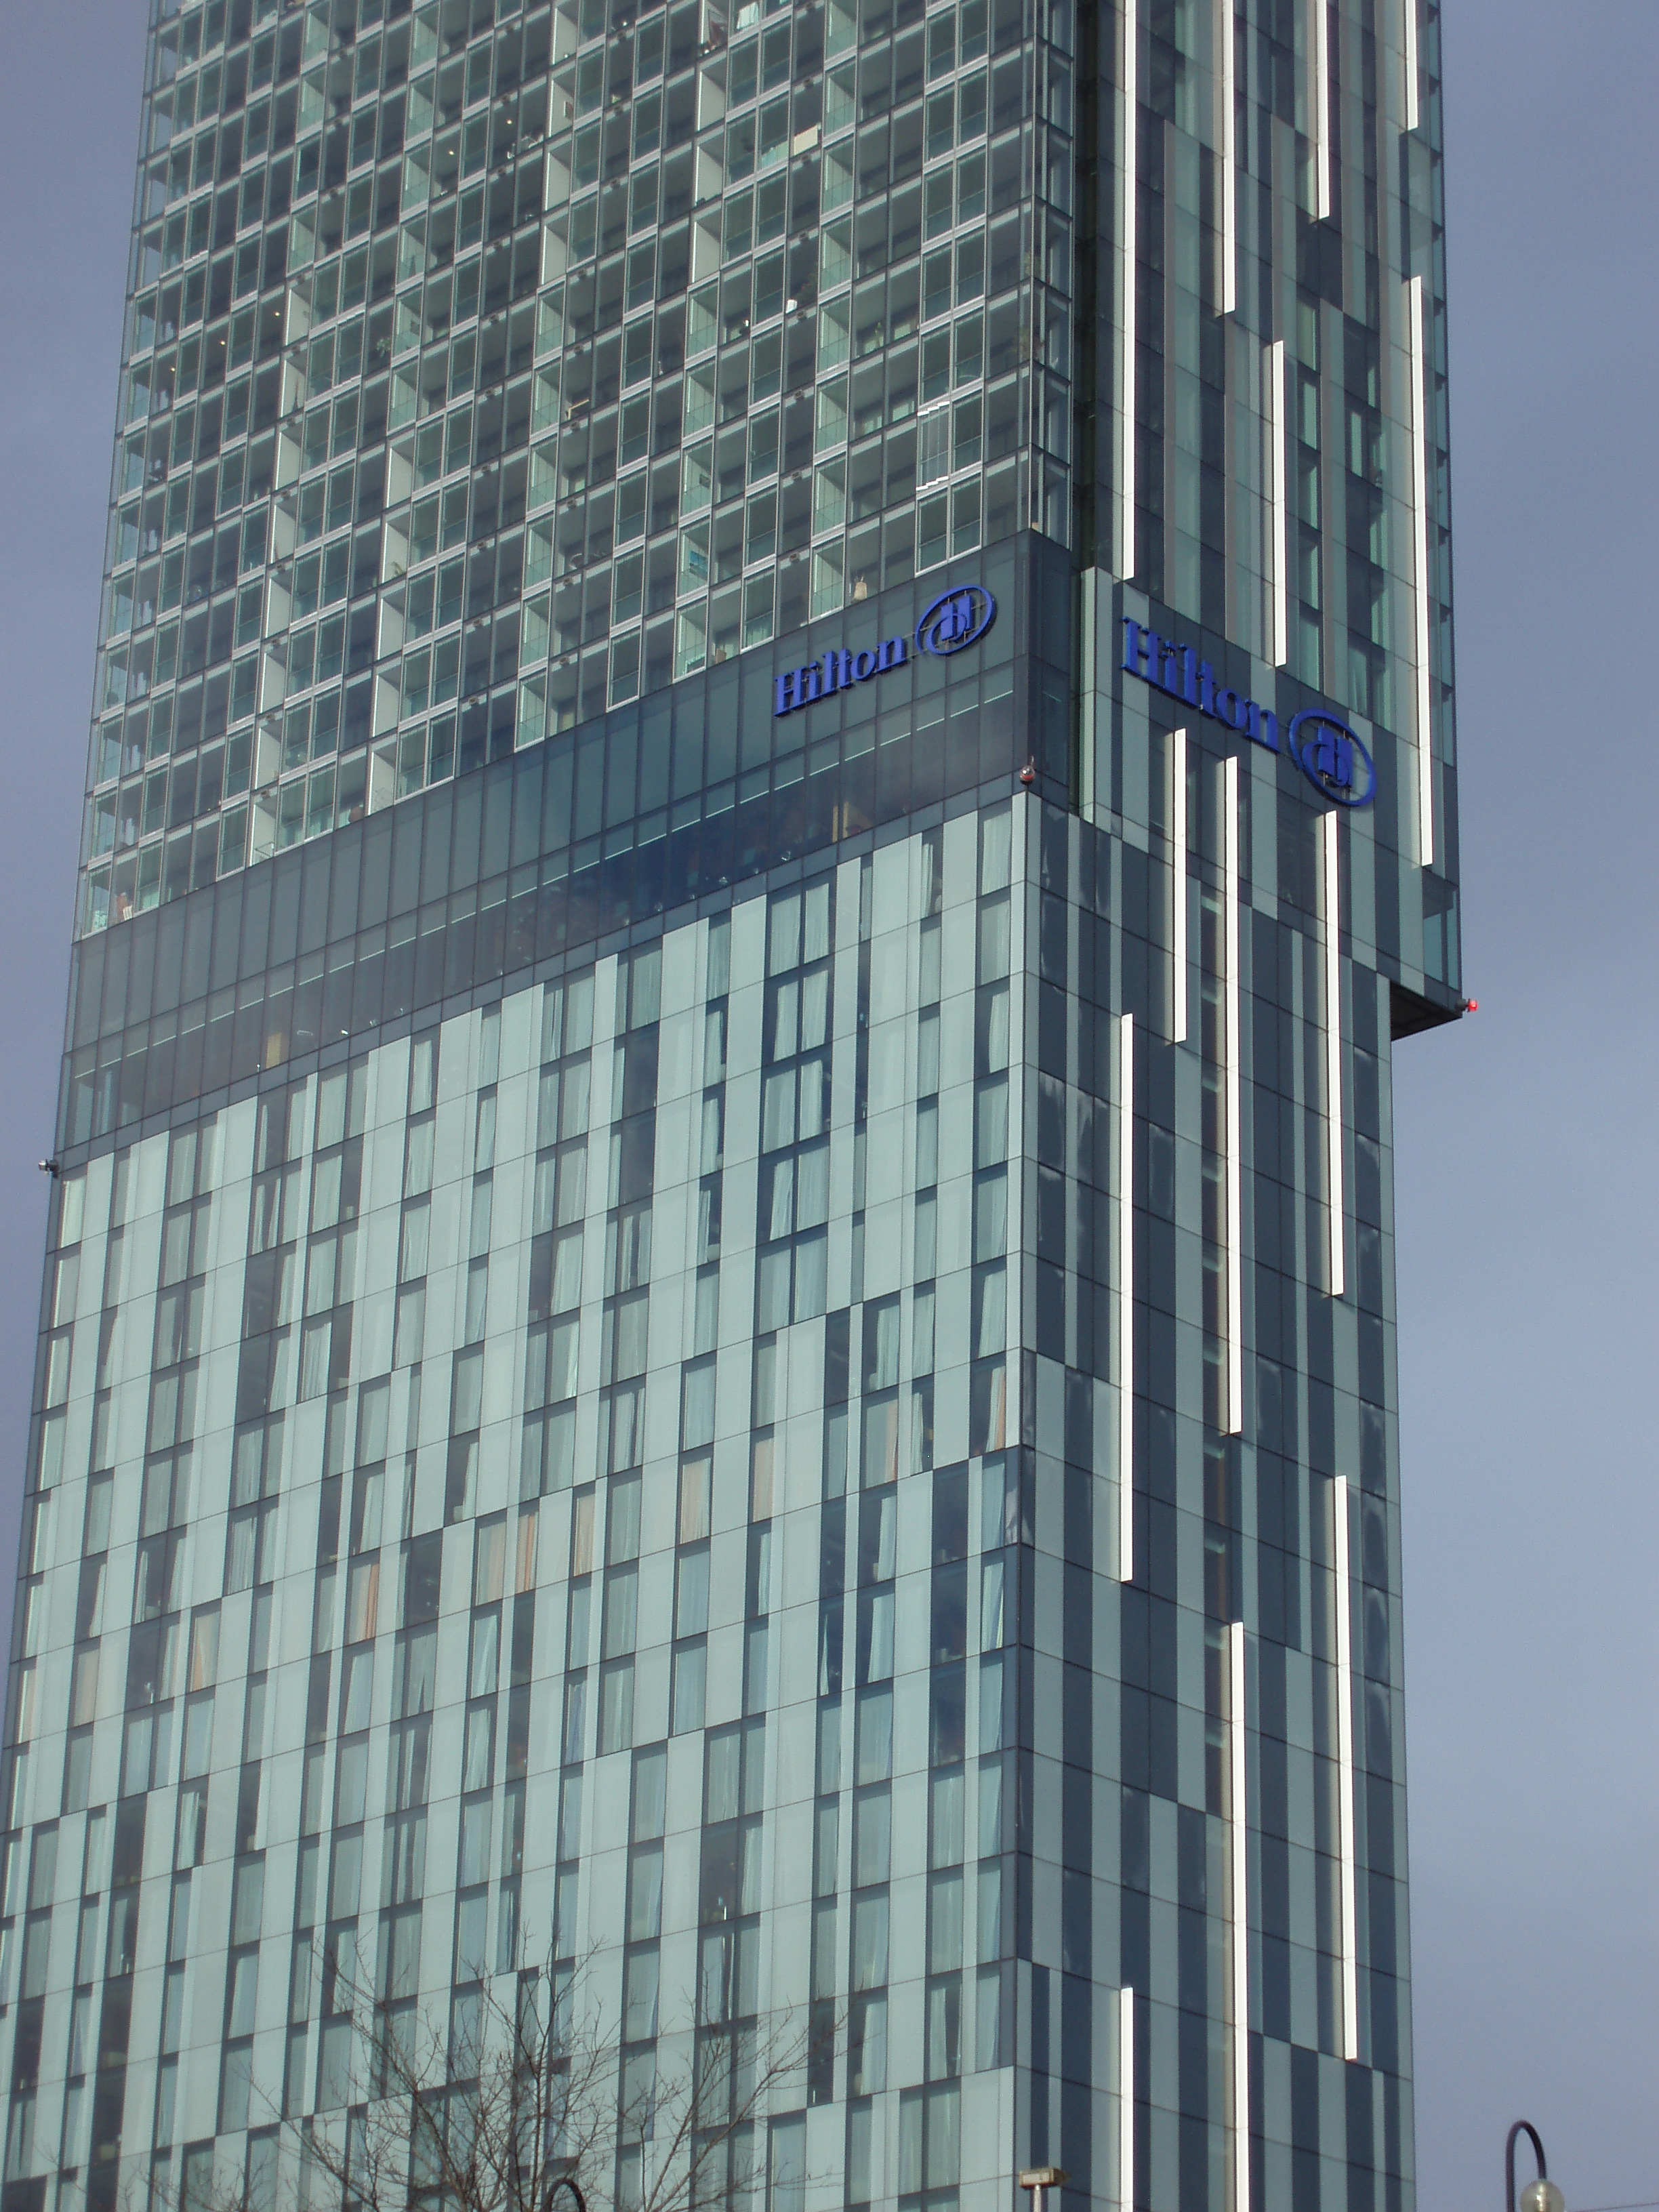 Beetham Tower Closeup | Free backgrounds and textures | Cr103.com